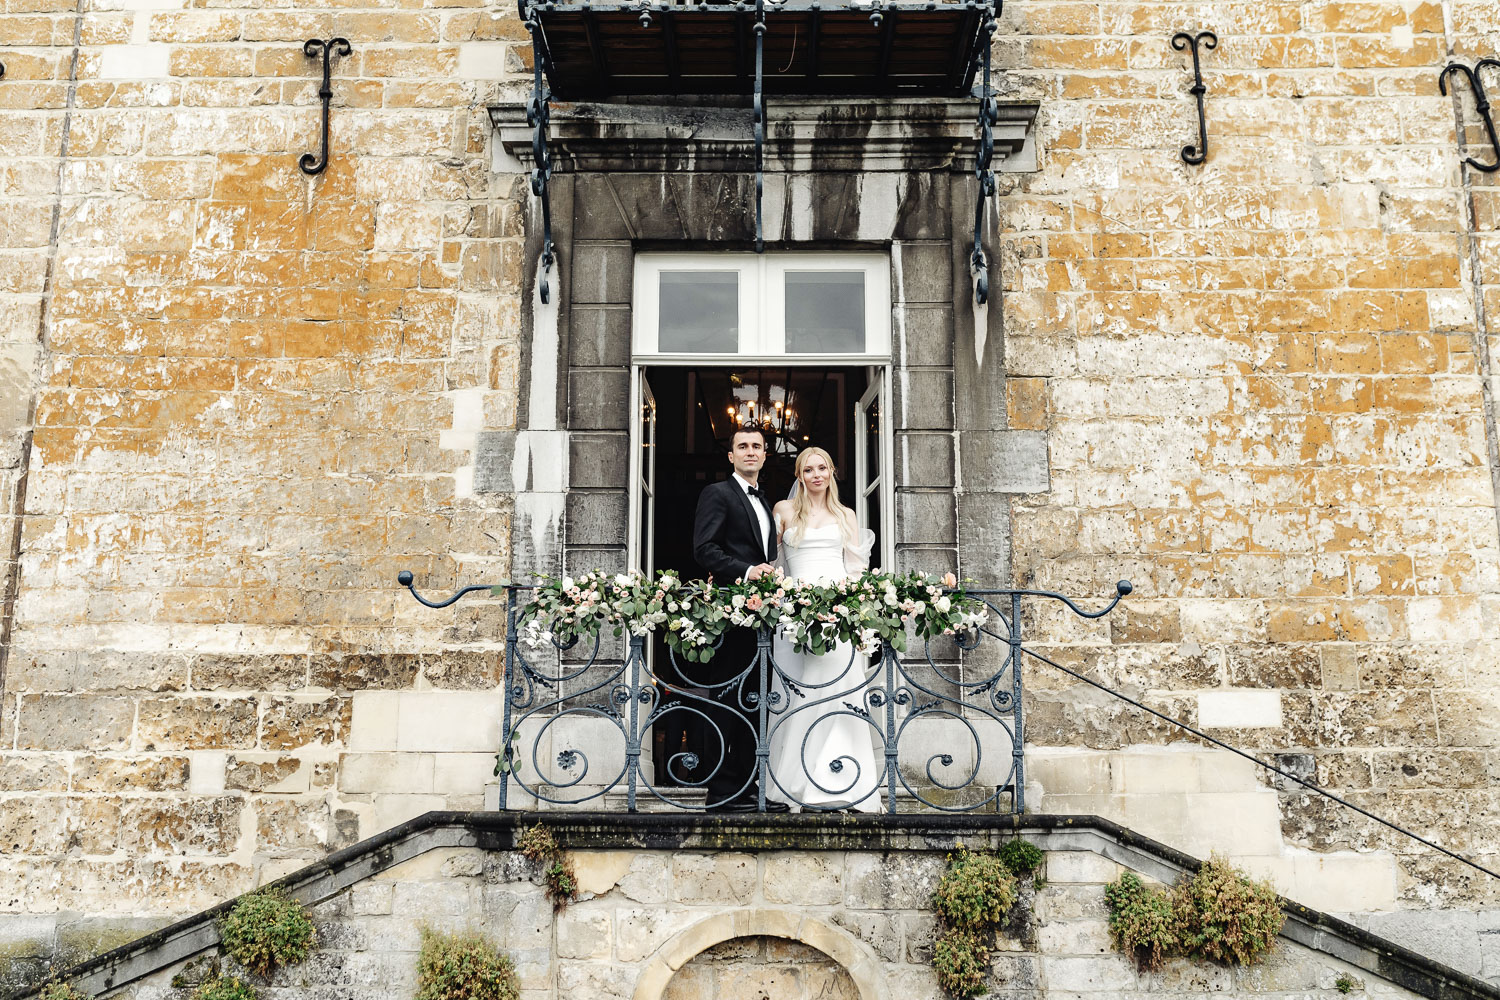 Bride and groom staying at the balcony of castle Chateau Neercanne